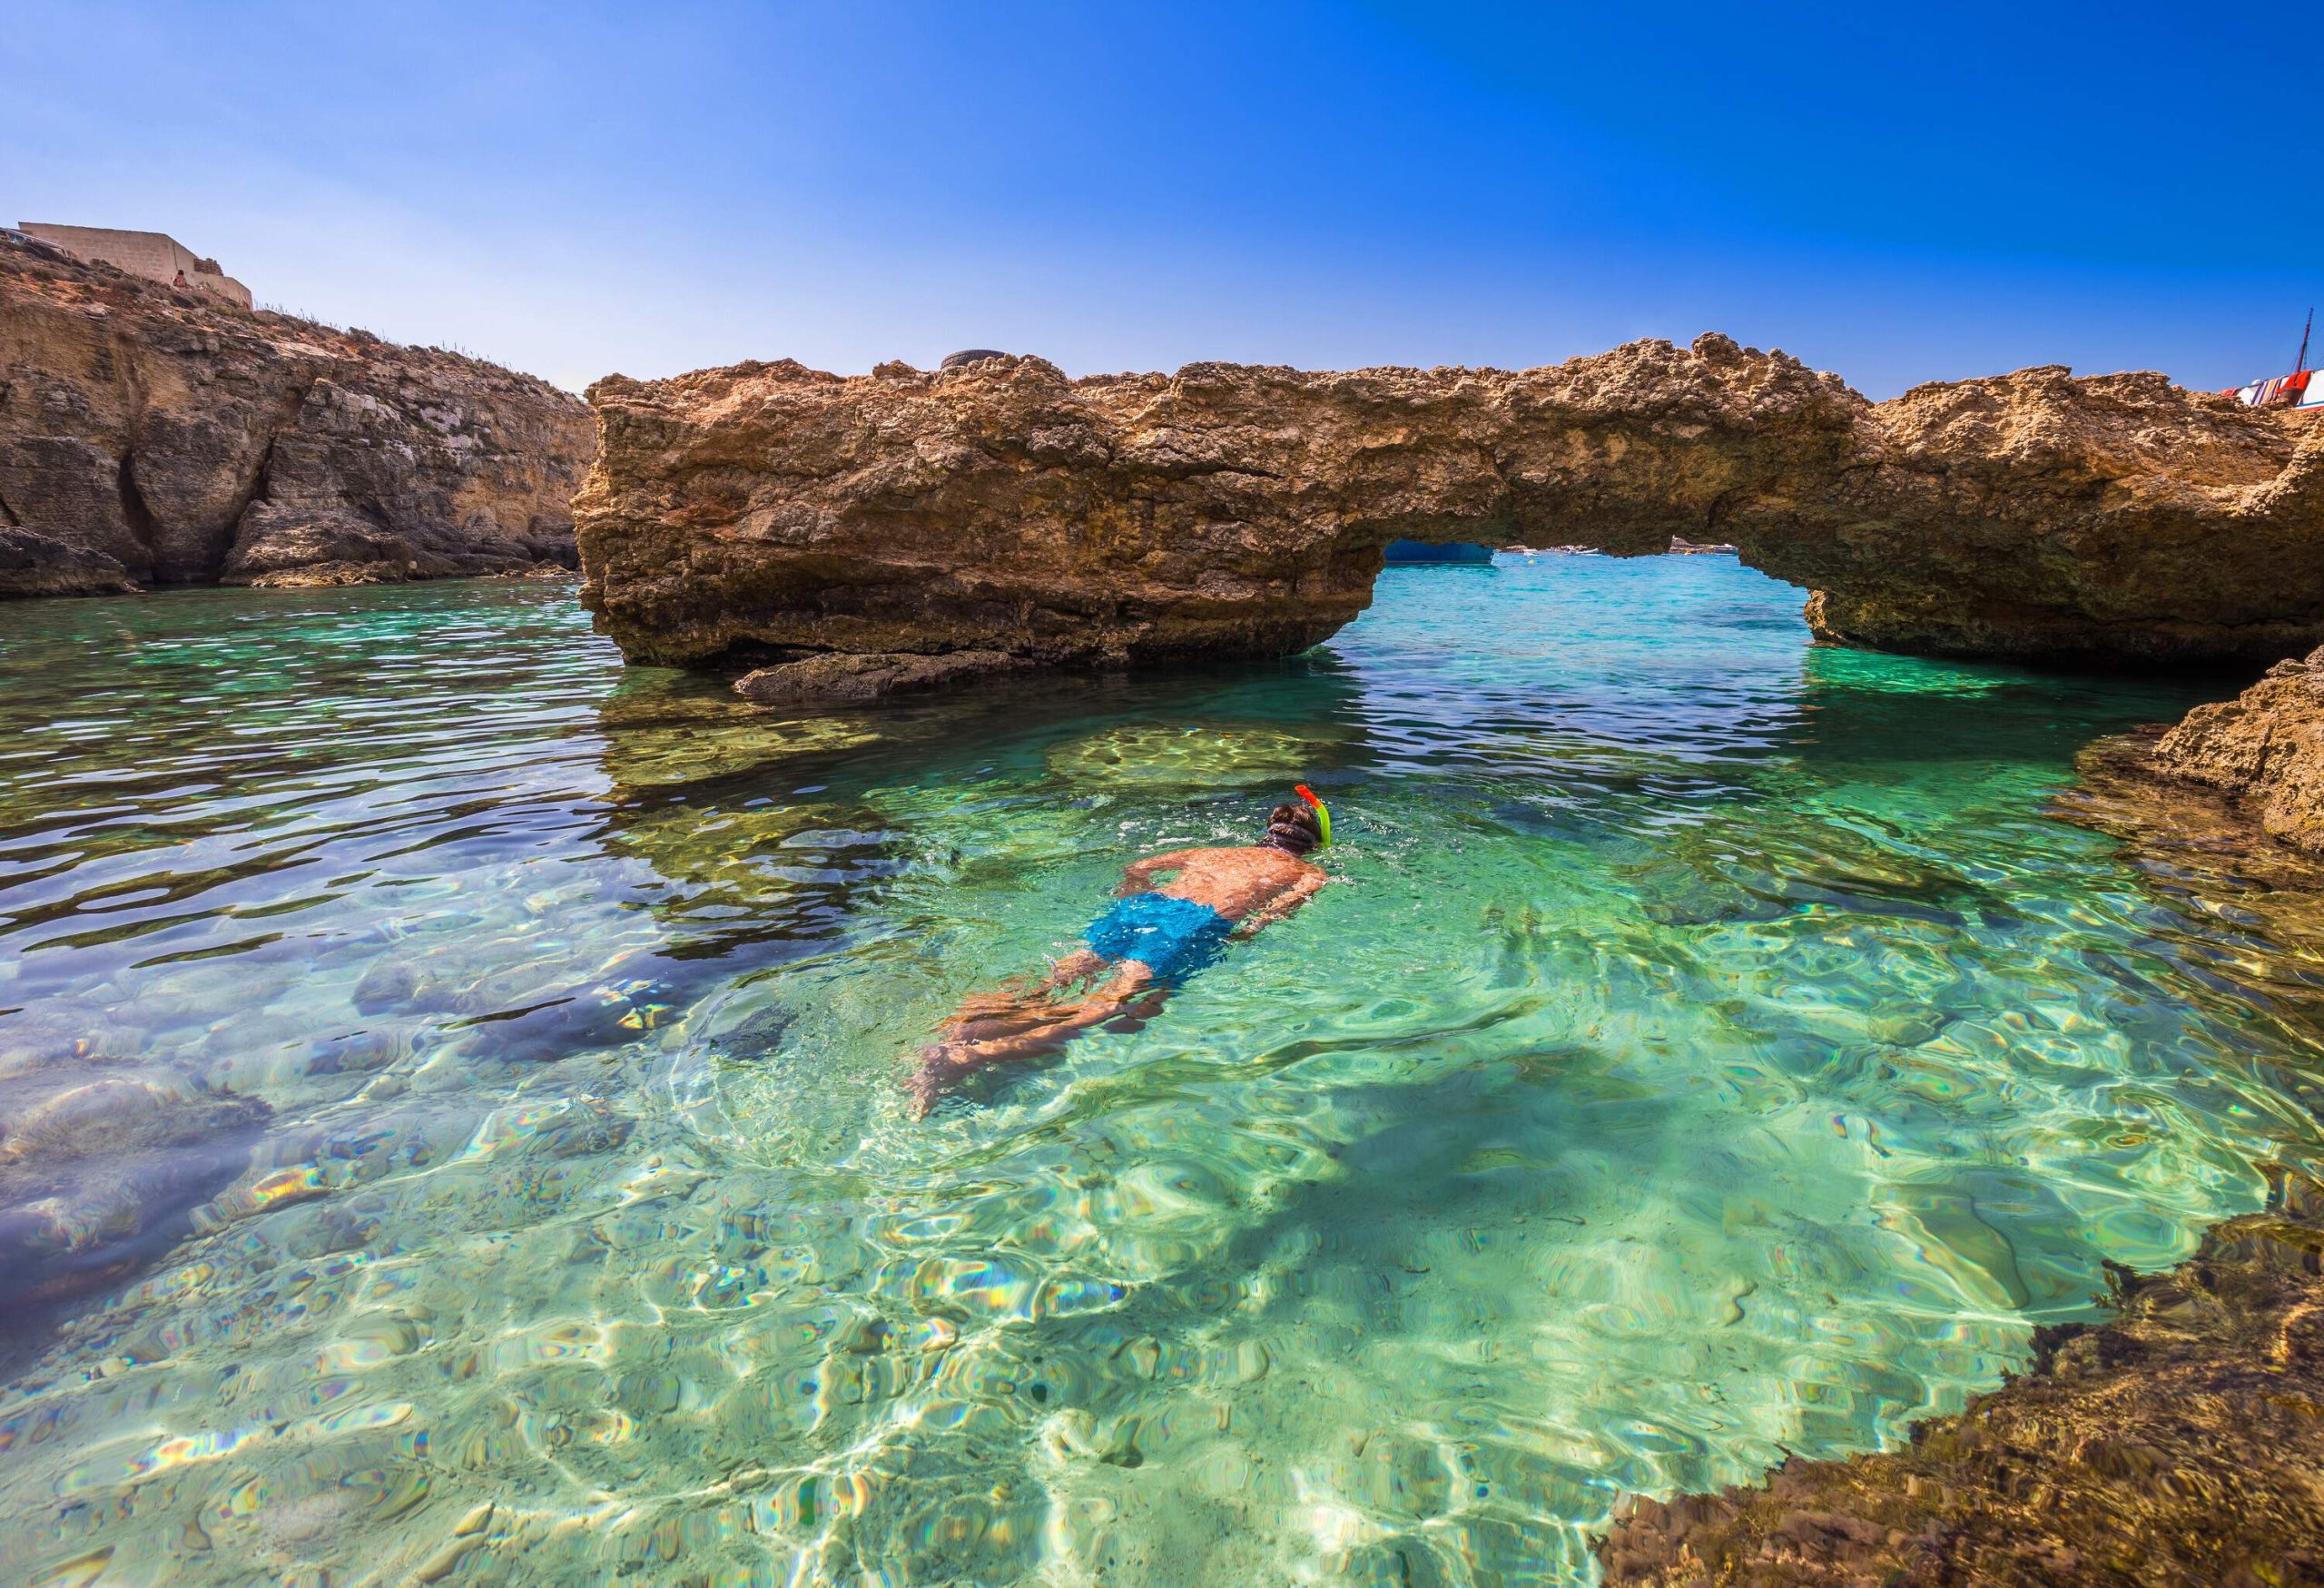 A person snorkelling on the clear waters of a lagoon with unique rock formations.